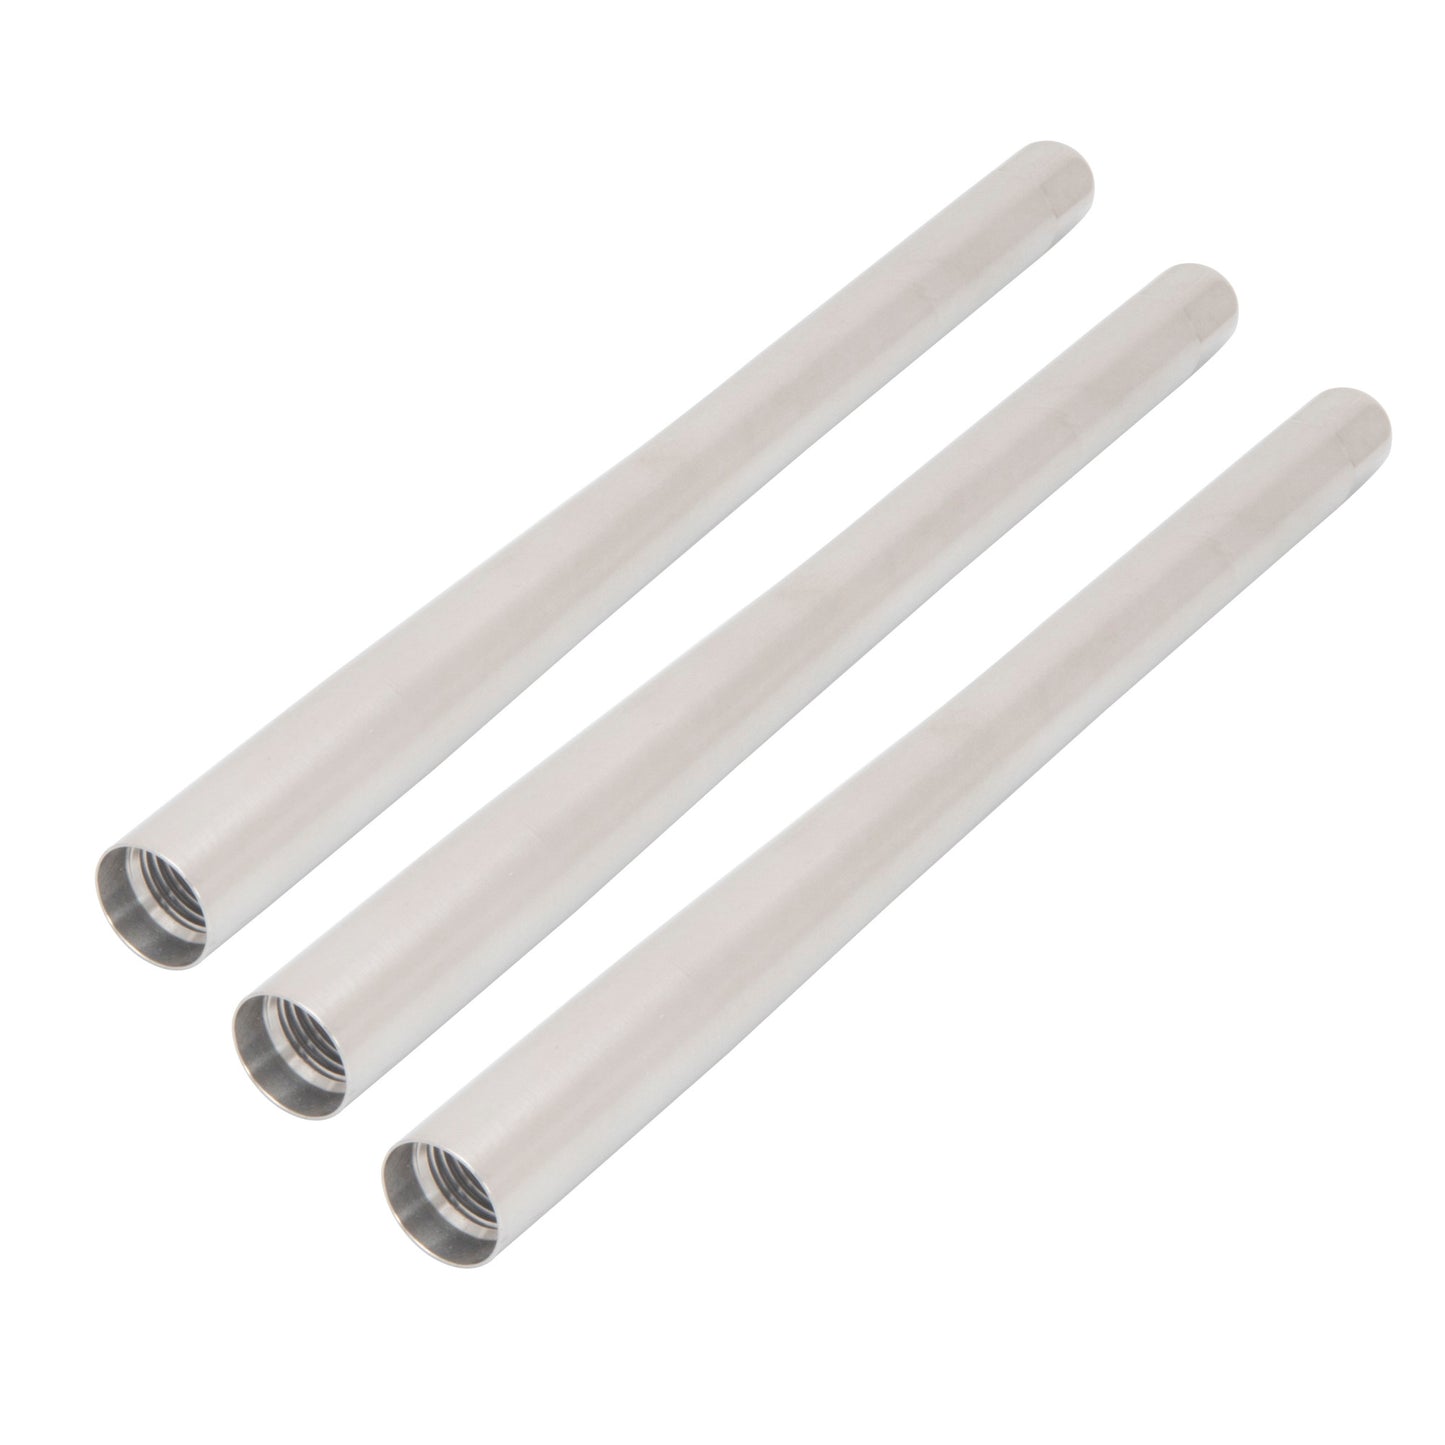 3-Piece Stainless Steel Female M14 x 1.5 Hex End Extra-Long Wheel Hanger and Lug Guide Tool Set